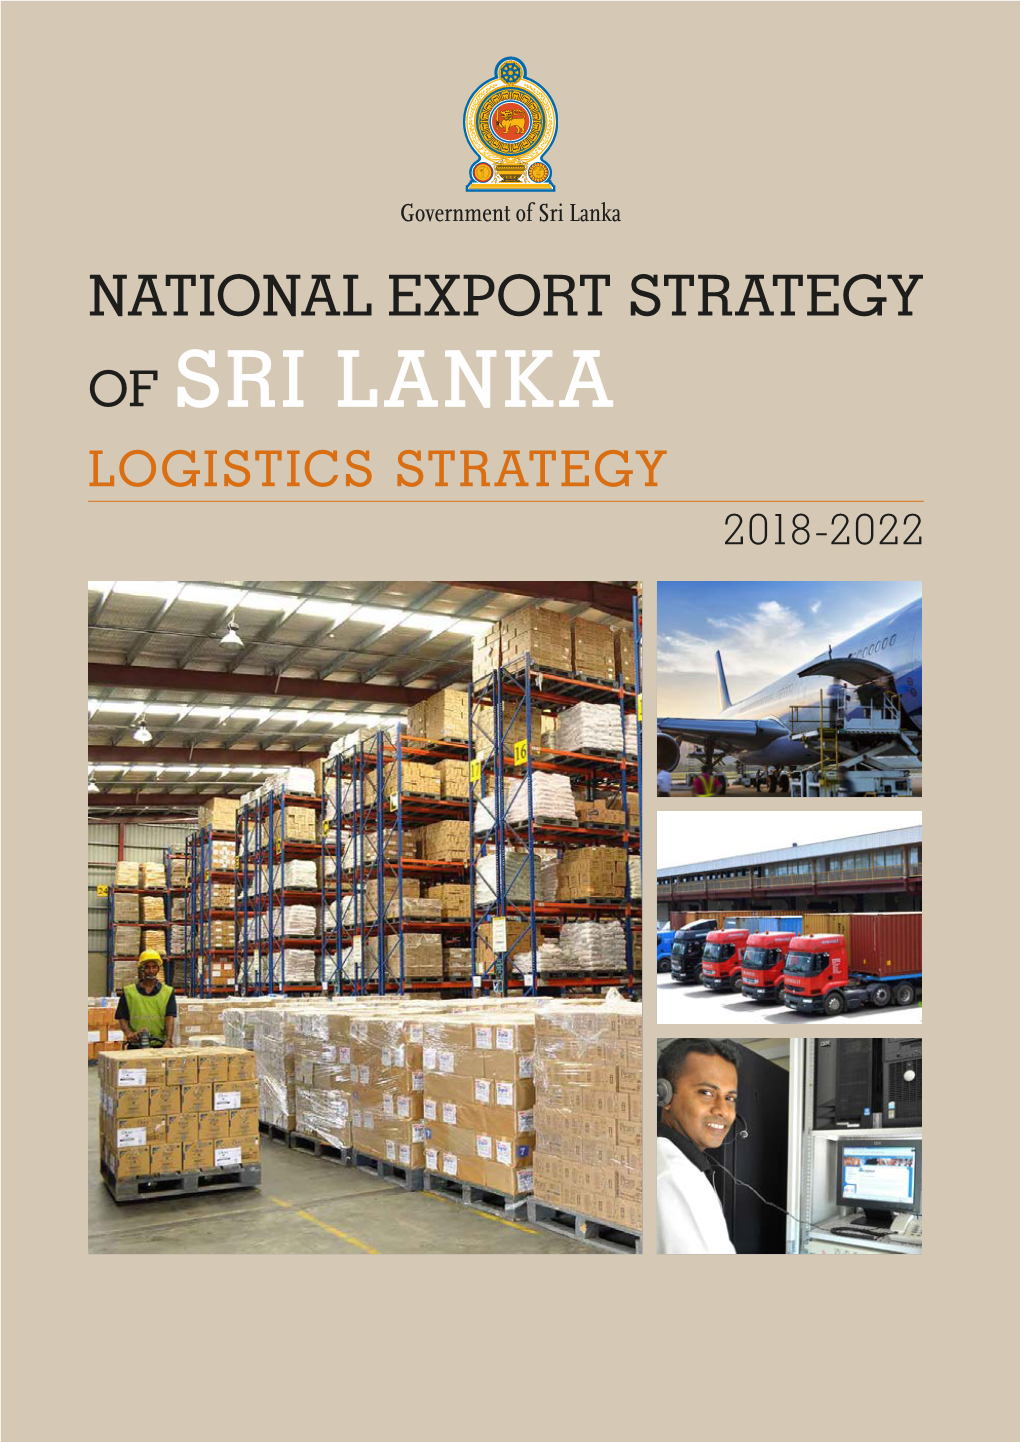 LOGISTICS STRATEGY 2018-2022 the National Export Strategy (NES) of Sri Lanka Is an Official Document of the Government of Sri Lanka